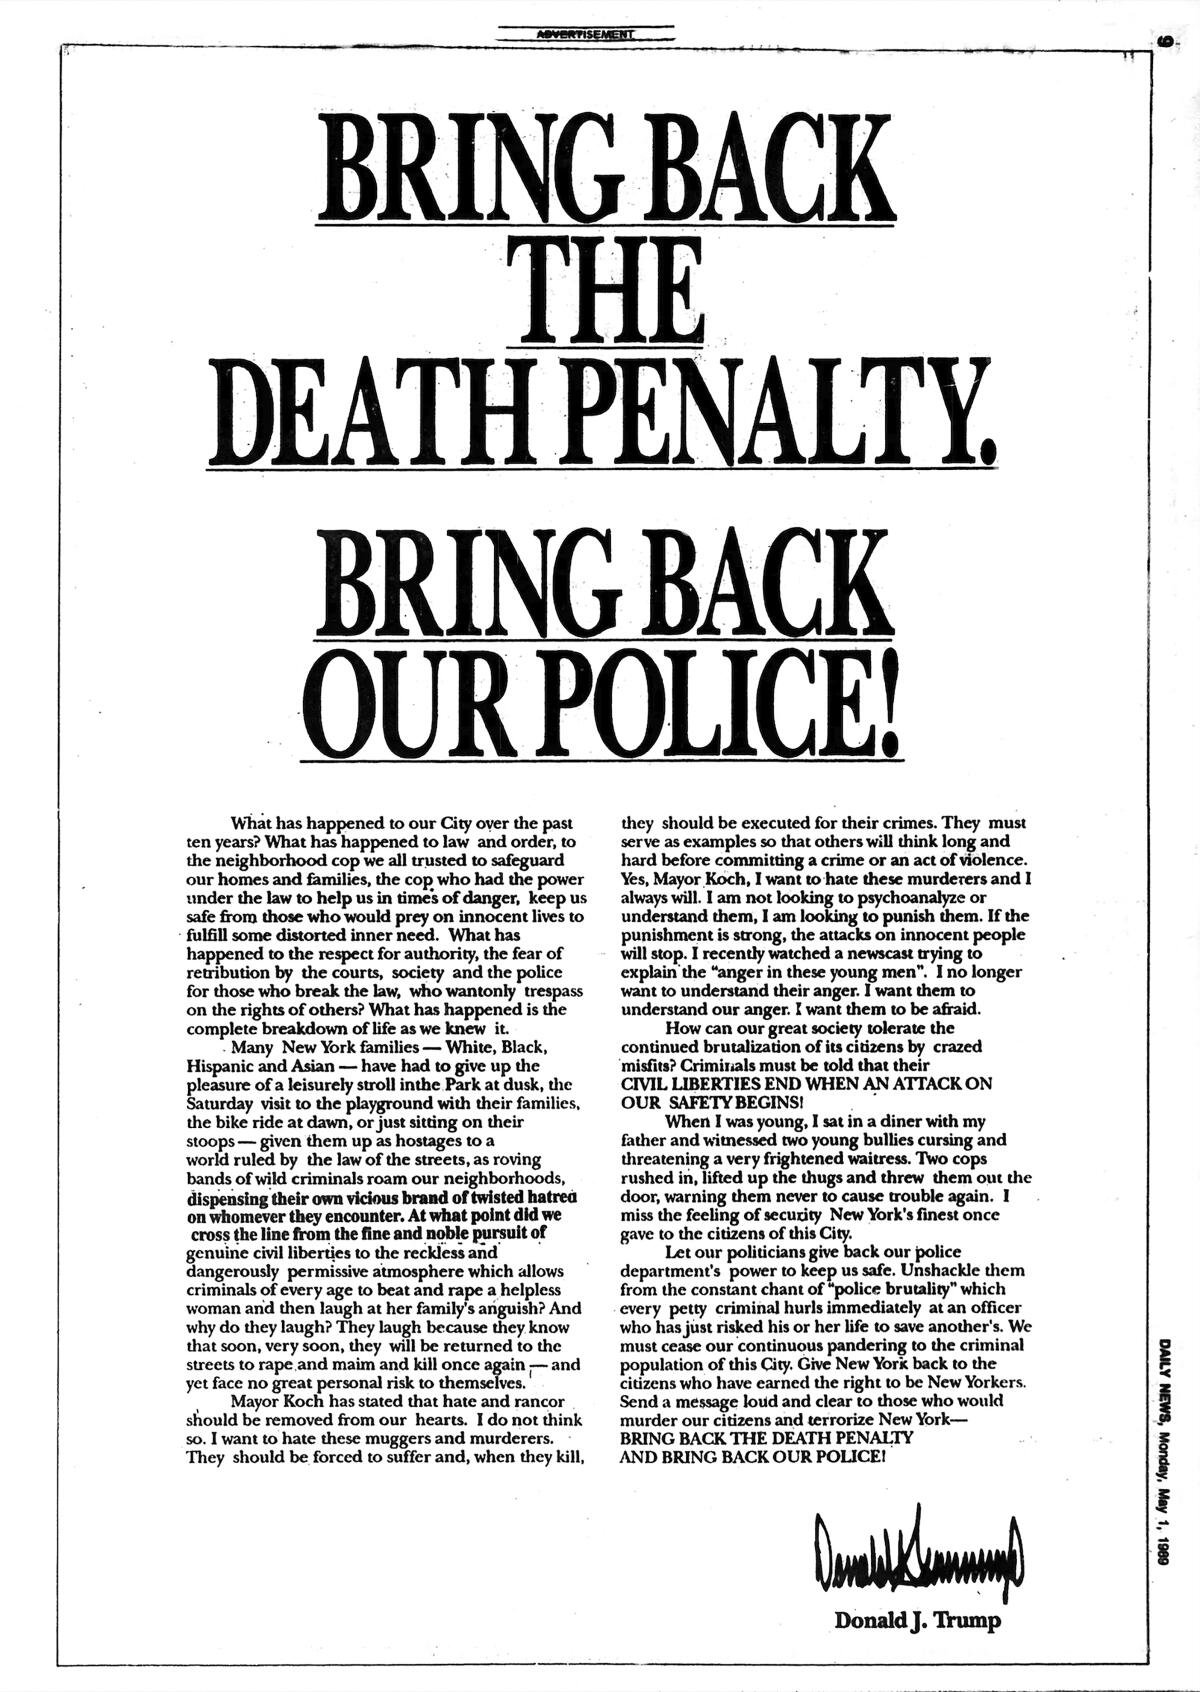 A May 1, 1989, full-page newspaper ad Donald Trump took out in the New York Daily News calling for five men's execution.